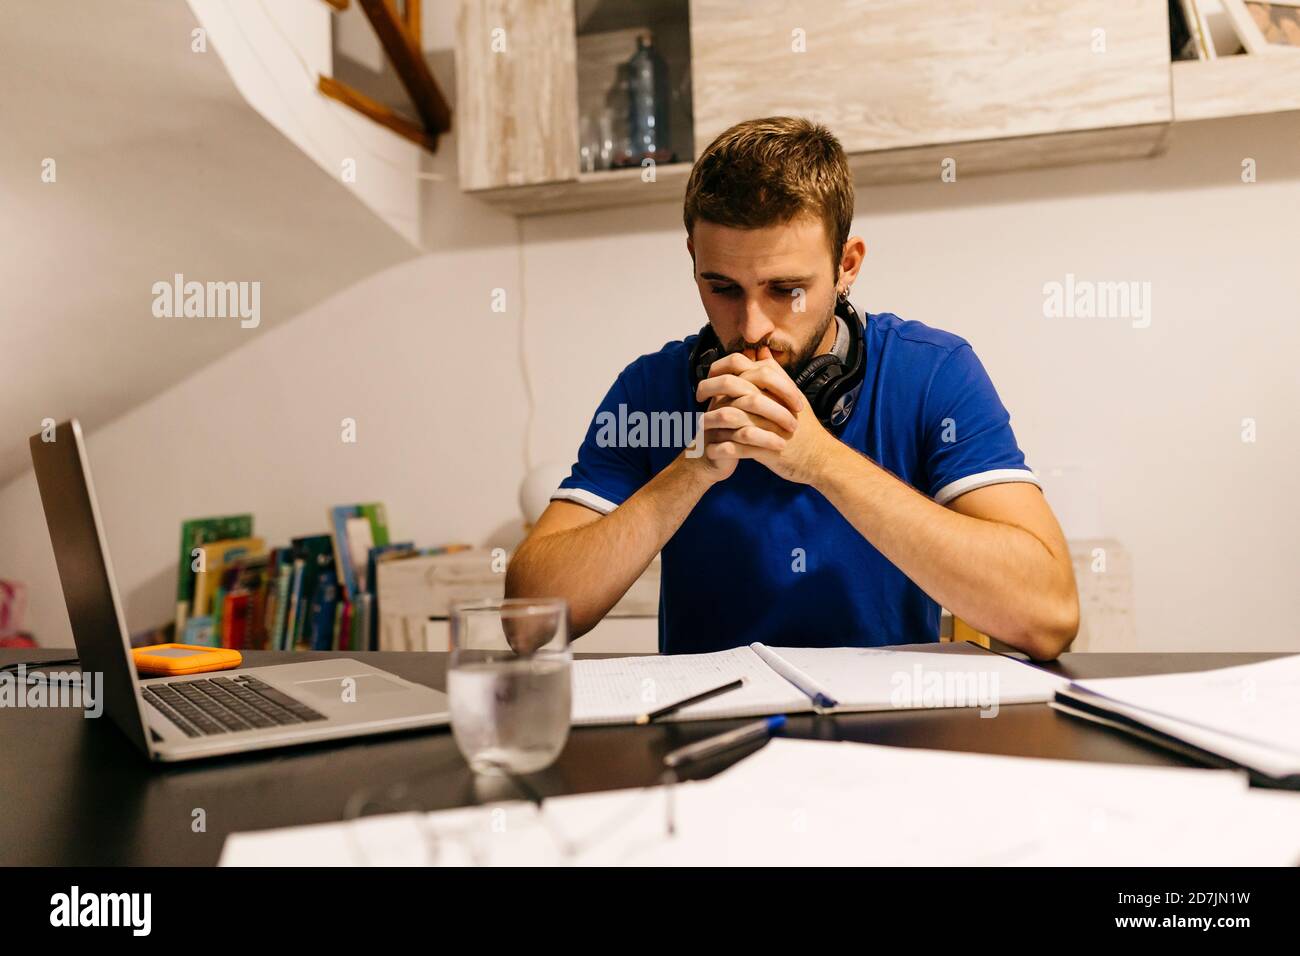 Dedicated young male student sitting with hands clasped while doing homework at table Stock Photo